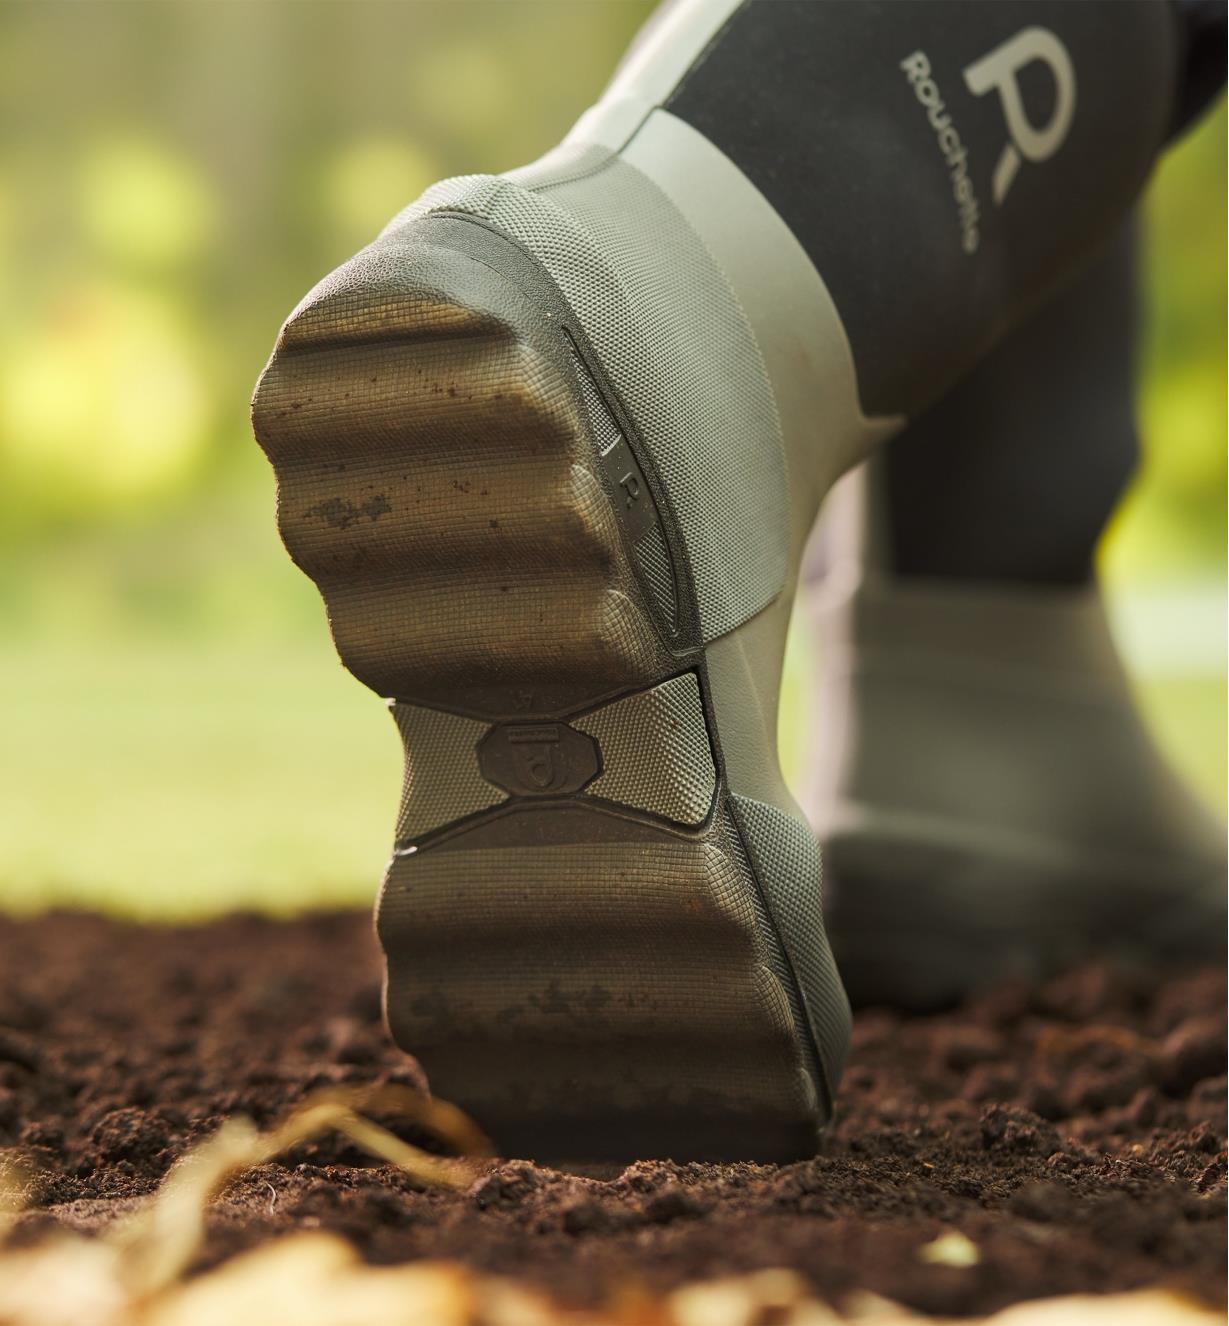 The bottom of a garden boot showing treads on the sole as the person wearing them walks through dirt